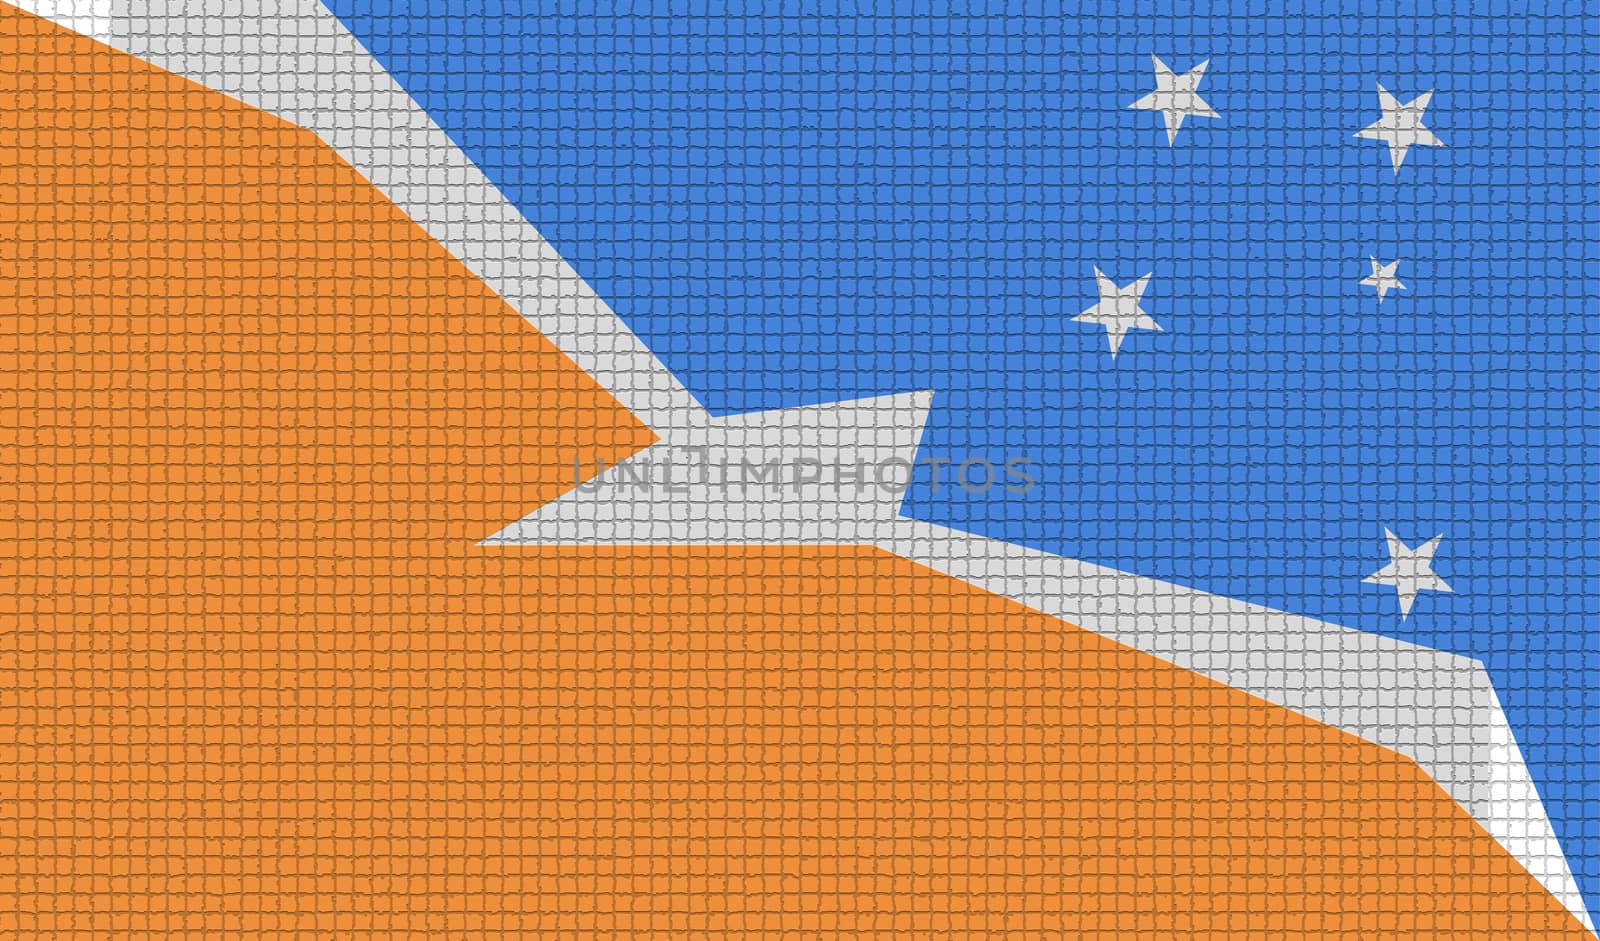 Flags of Tierra del Fuego Province with abstract textures. Rasterized version